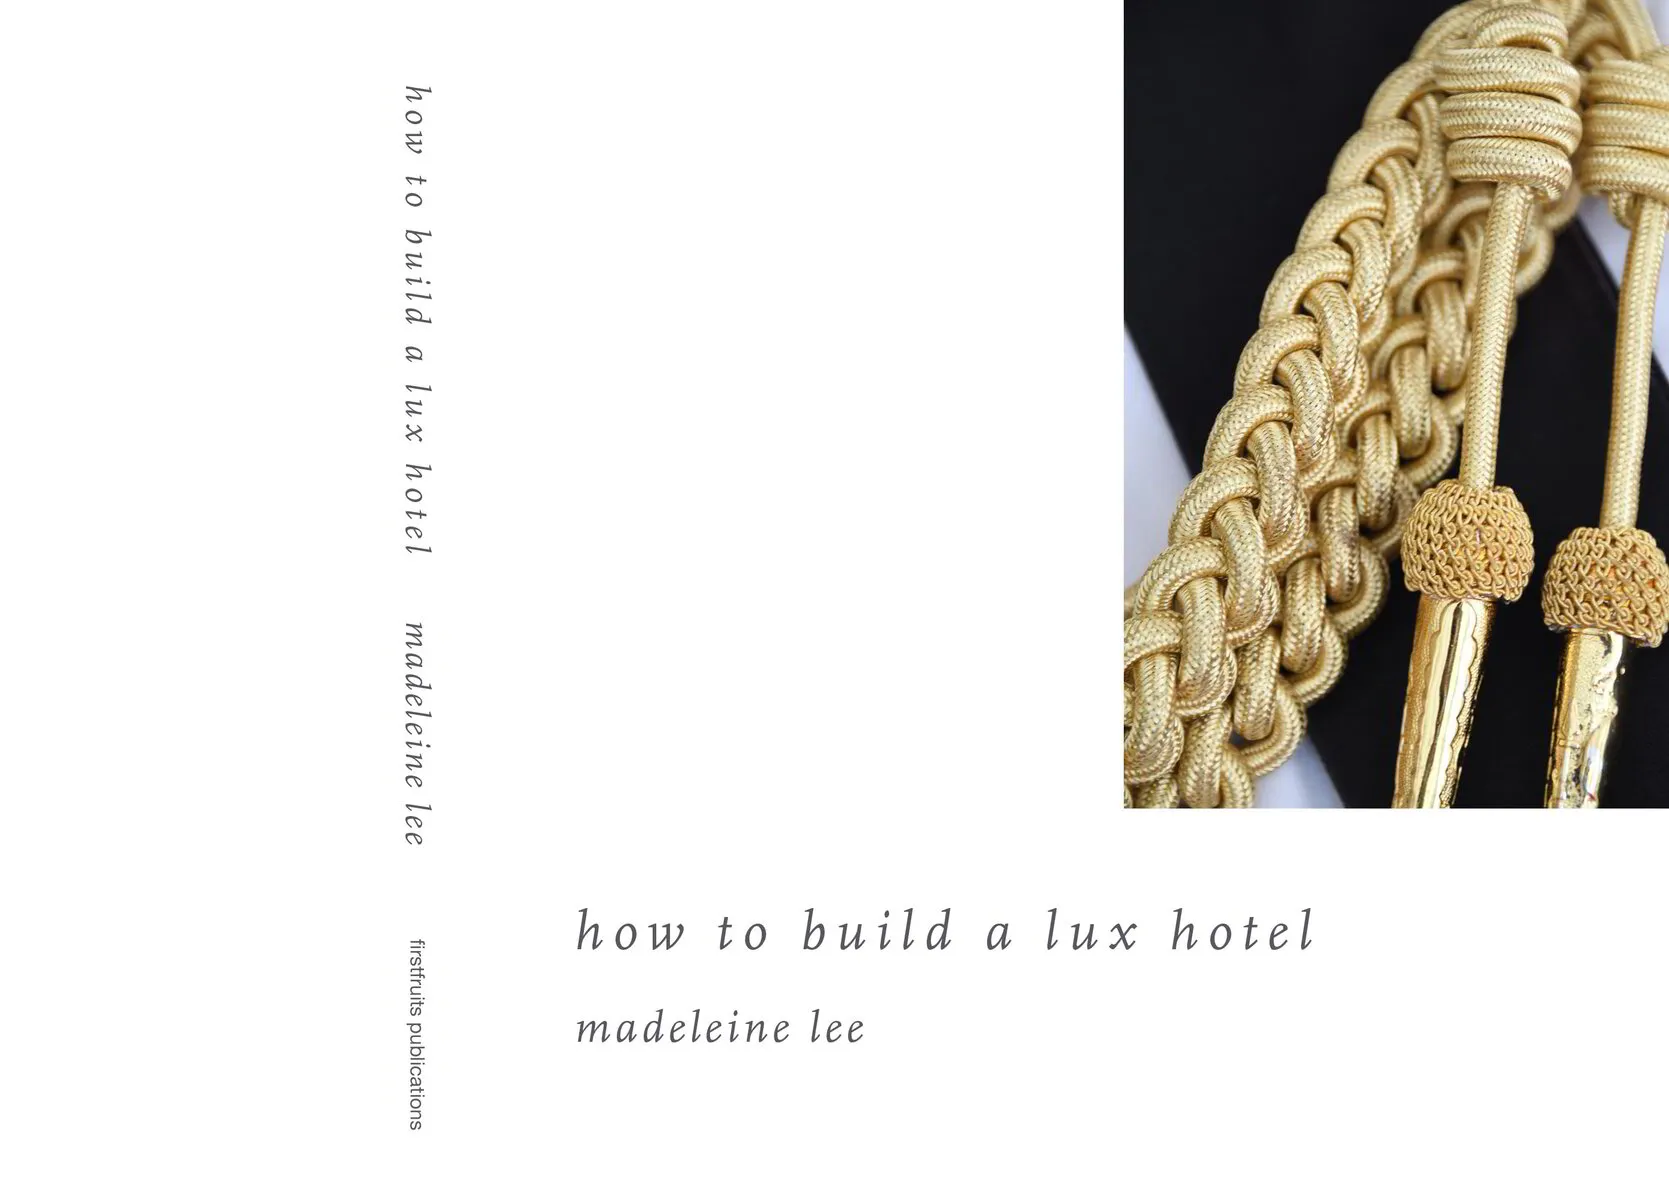 // how to build a lux hotel / madeleine lee